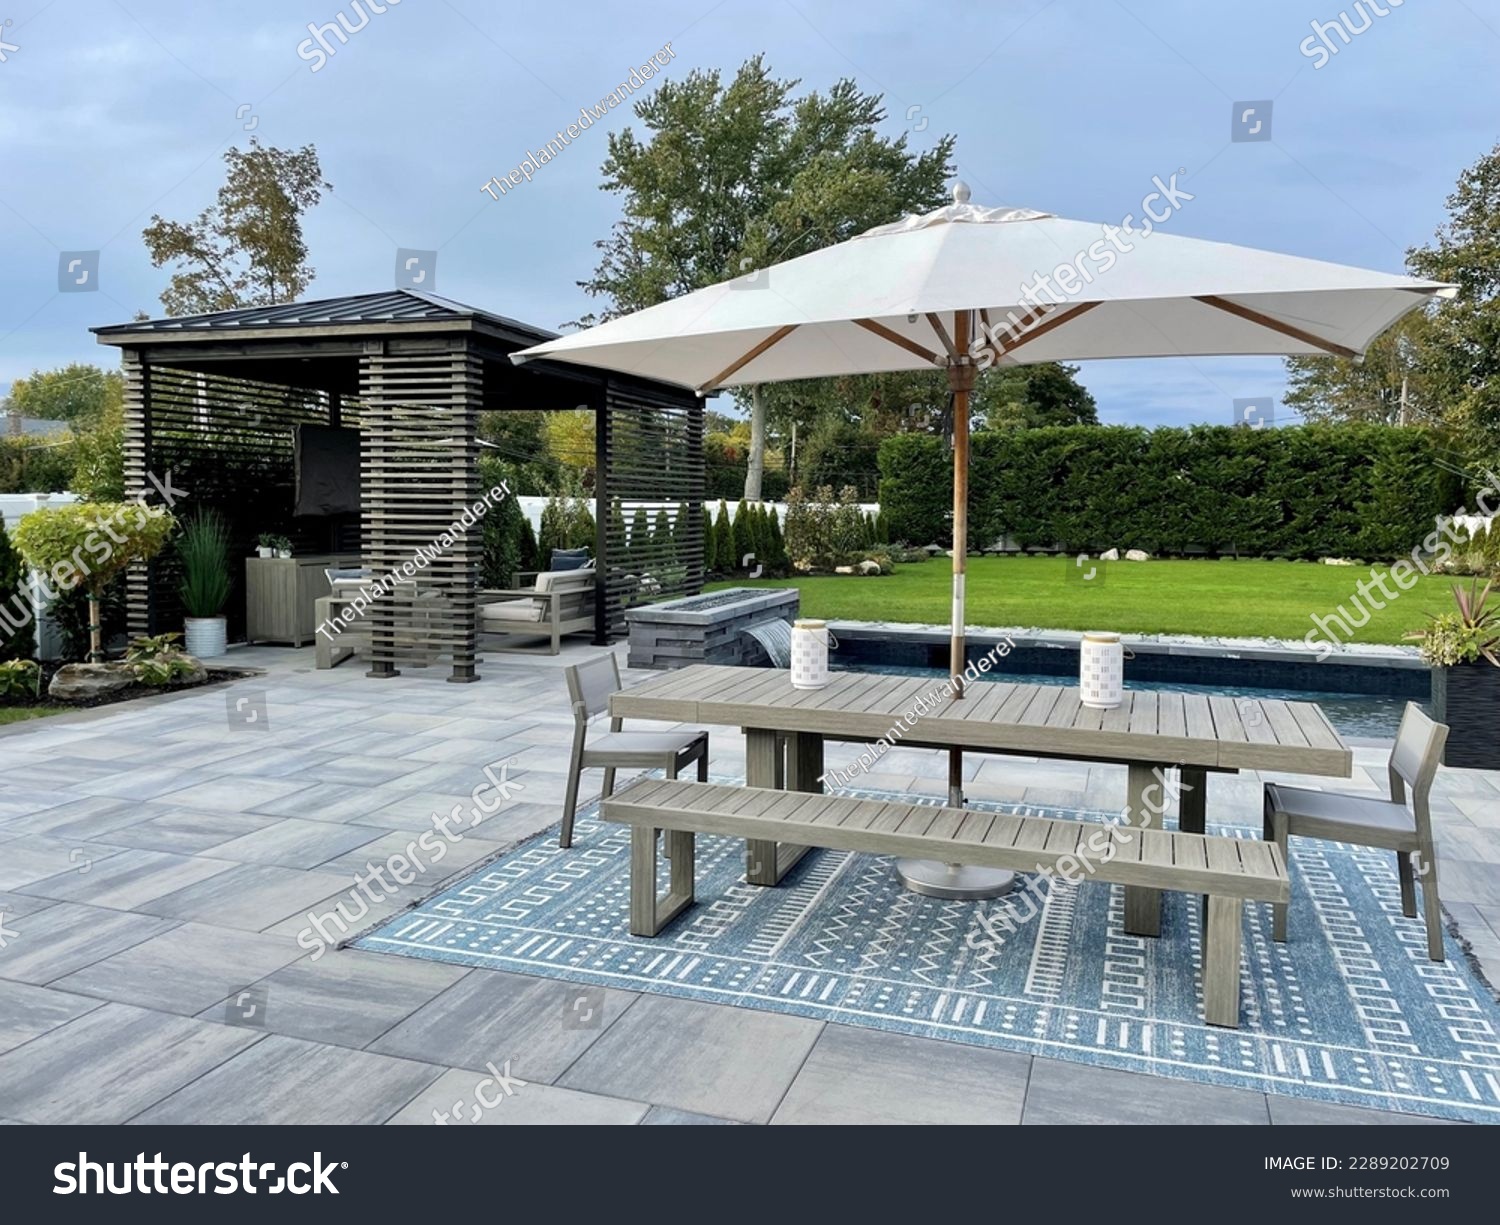 Gorgeous outdoor living backyard patio with pergola, outdoor rug,  tequila bar, dining set, couch, television, pool with waterfall , fire pit and stunning Techo Bloc patio pavers - Inspired by tulum. #2289202709